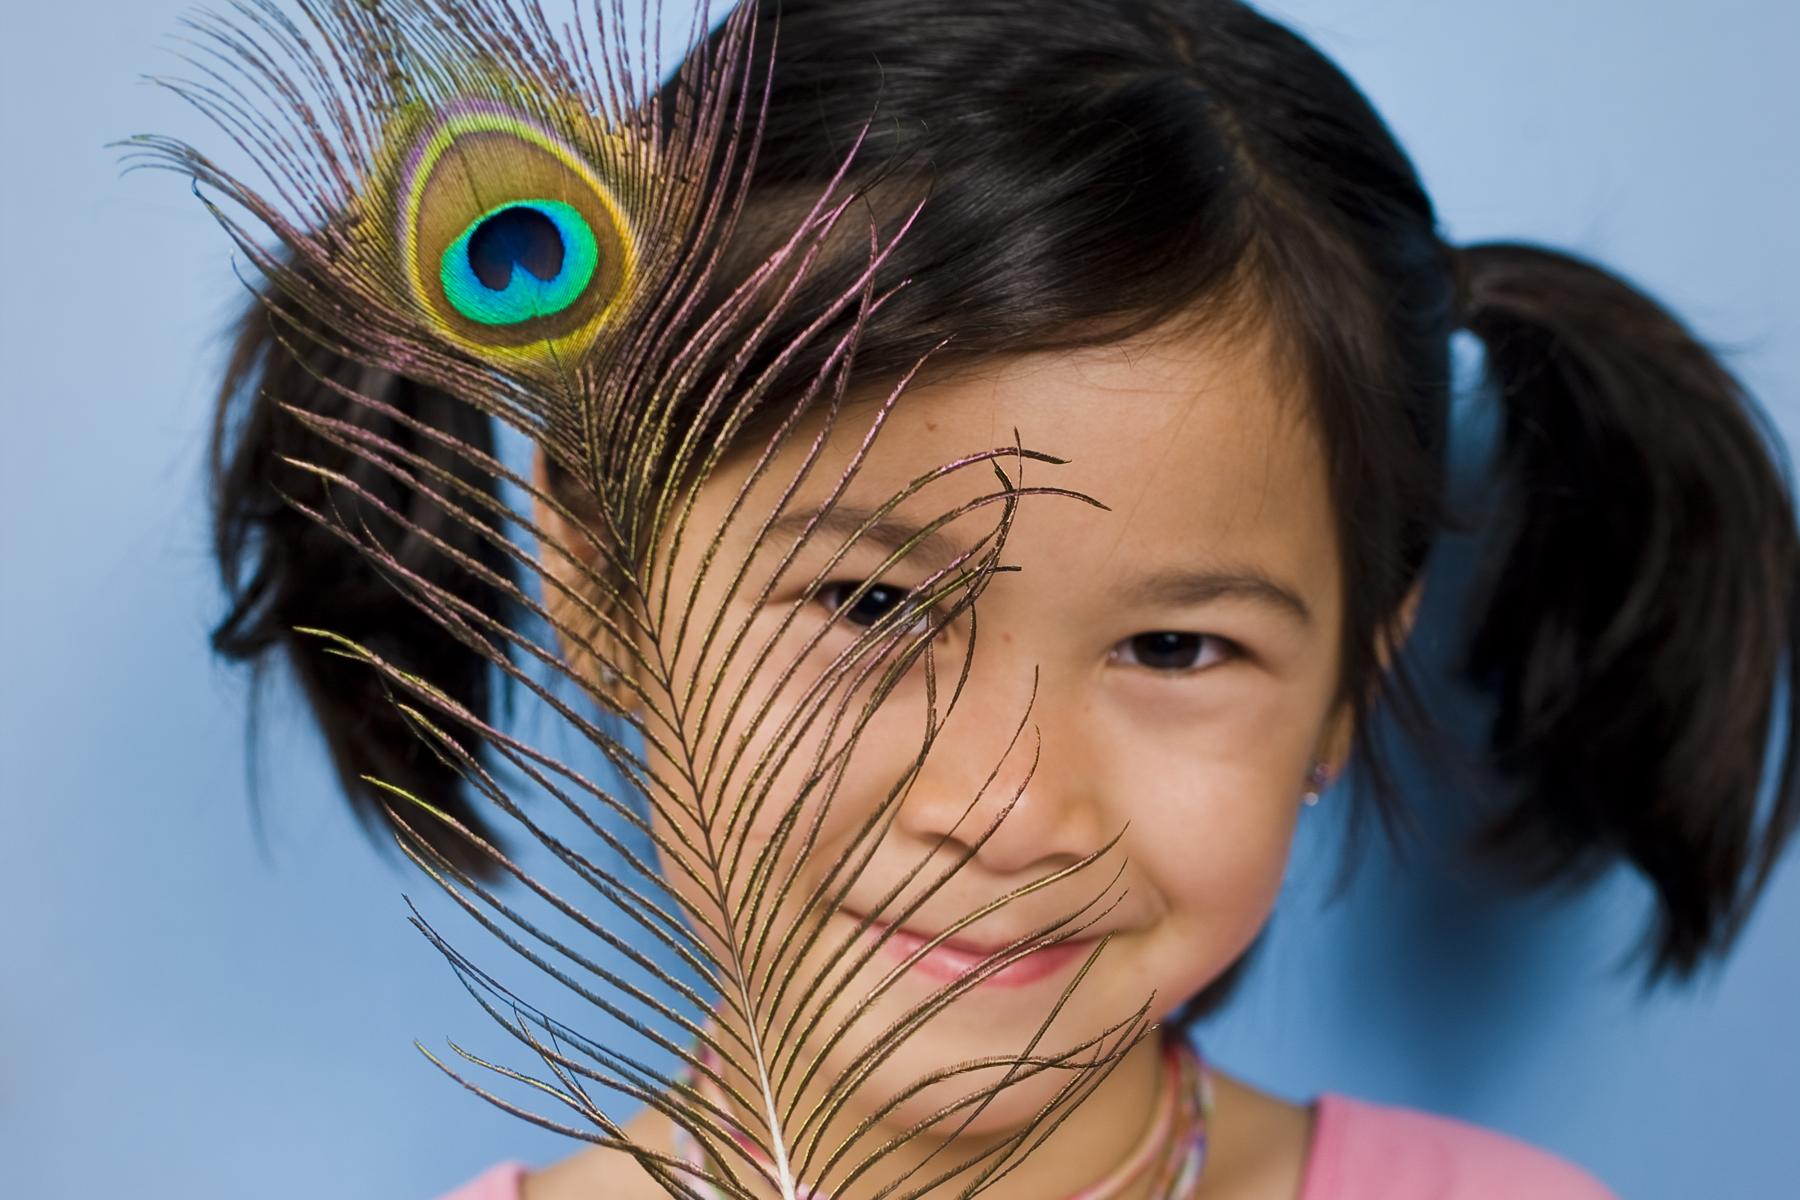 A girl with a peacock feather.